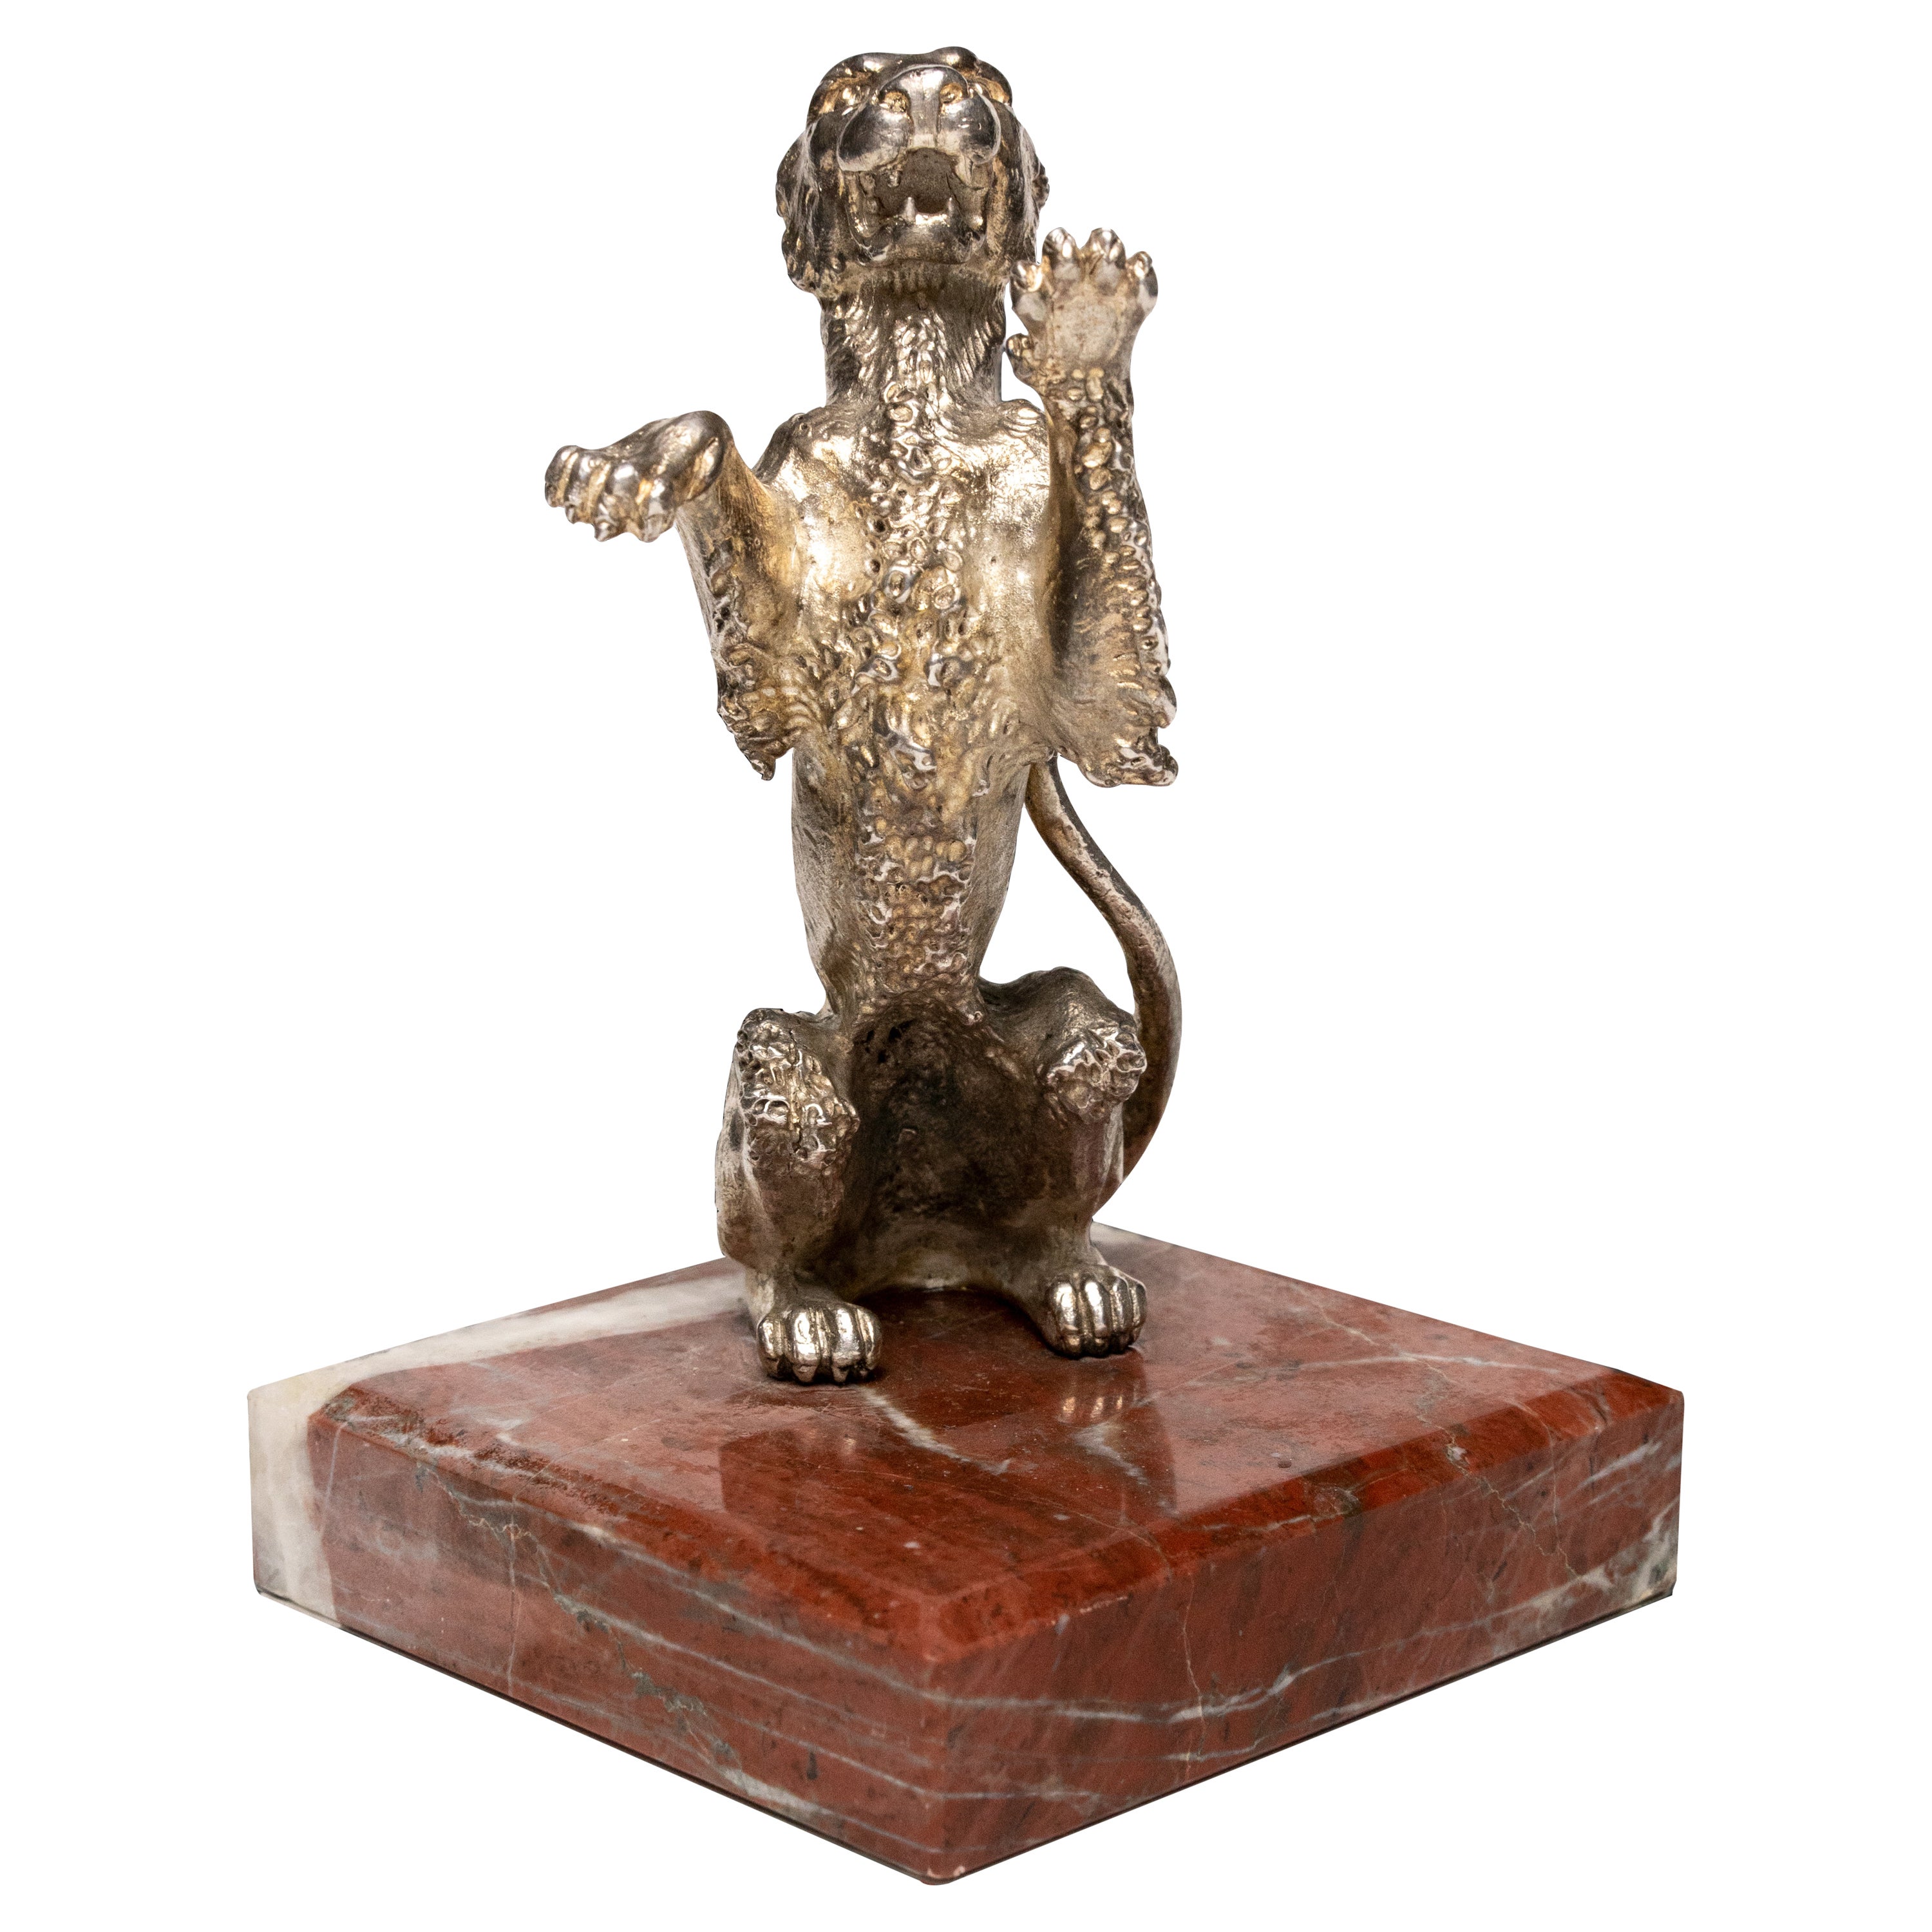 Car Radiator Ornament/Mascot of a Lioness Stamped Odiot For Sale